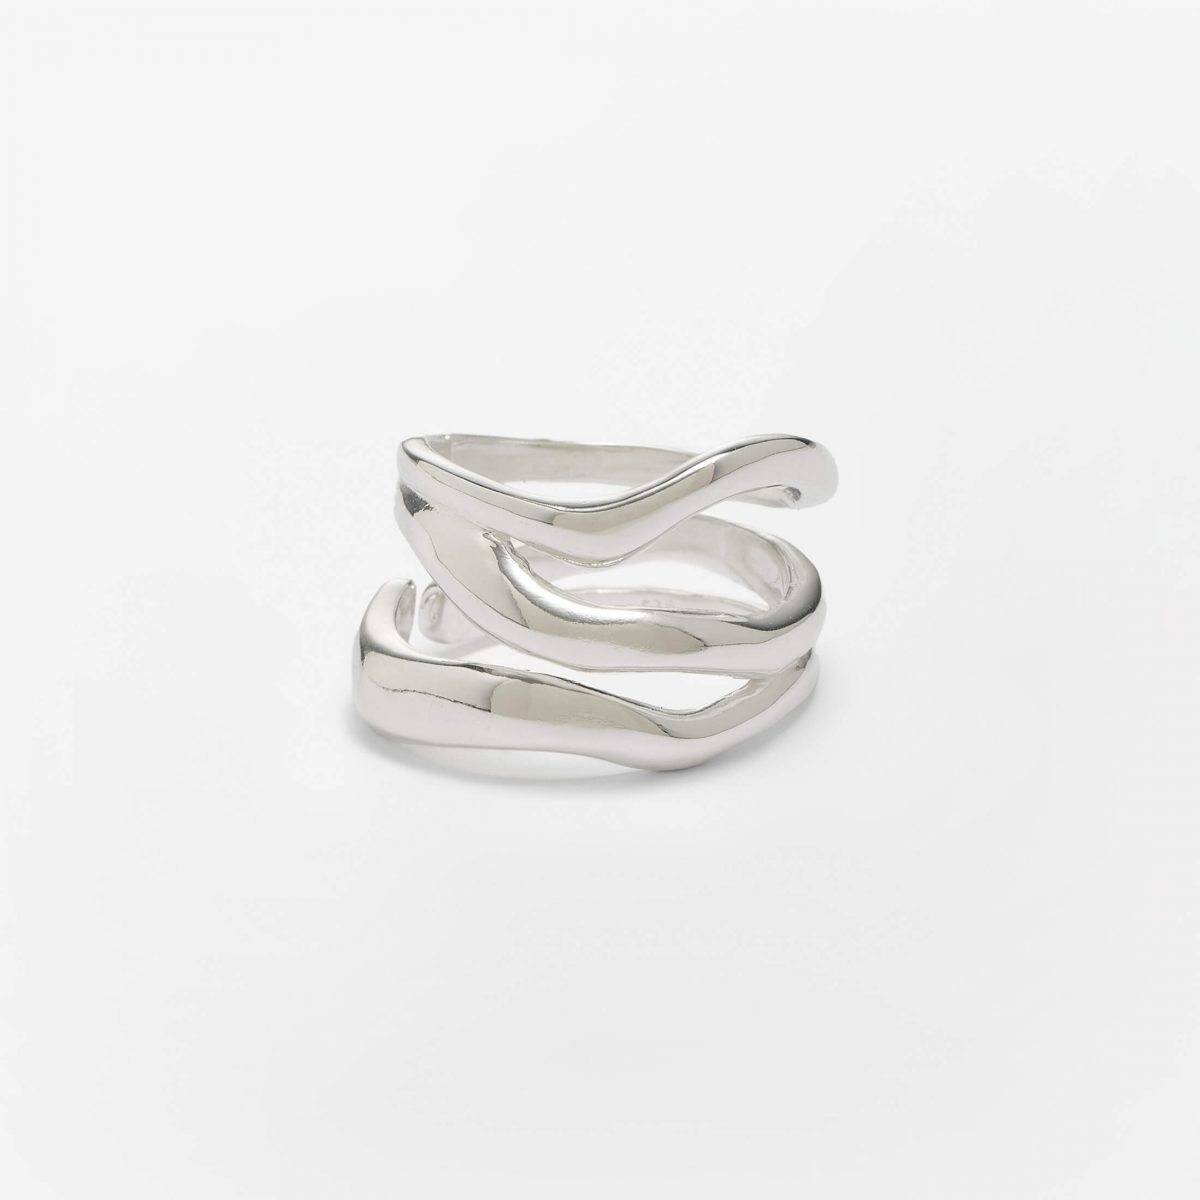 Silver Dazzling Ring by Xoutou's